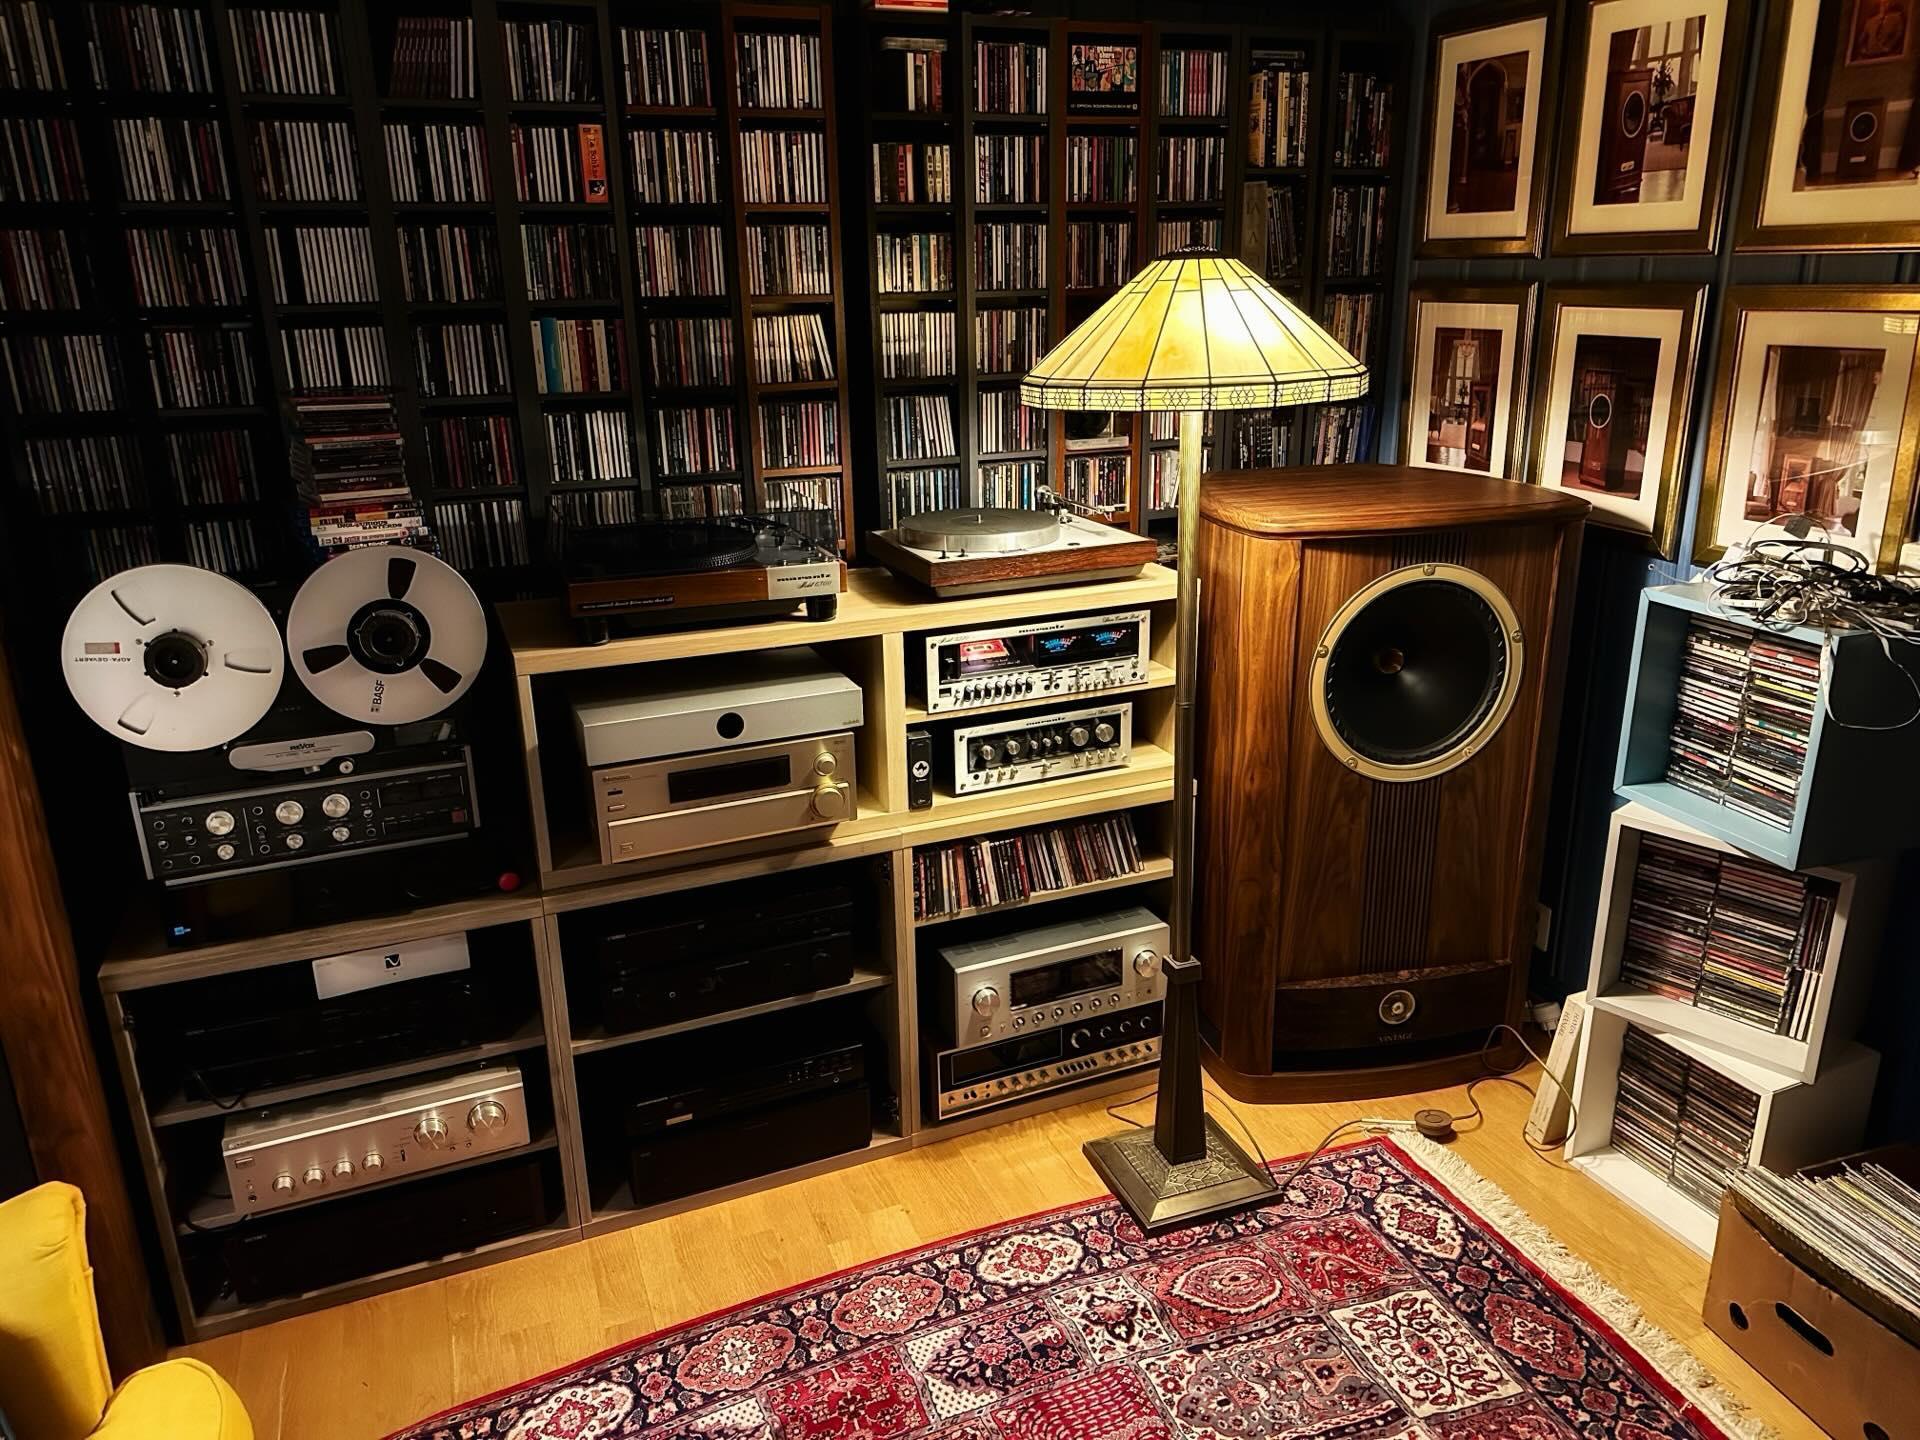 Vinyl, Vintage, and the Love of Sound